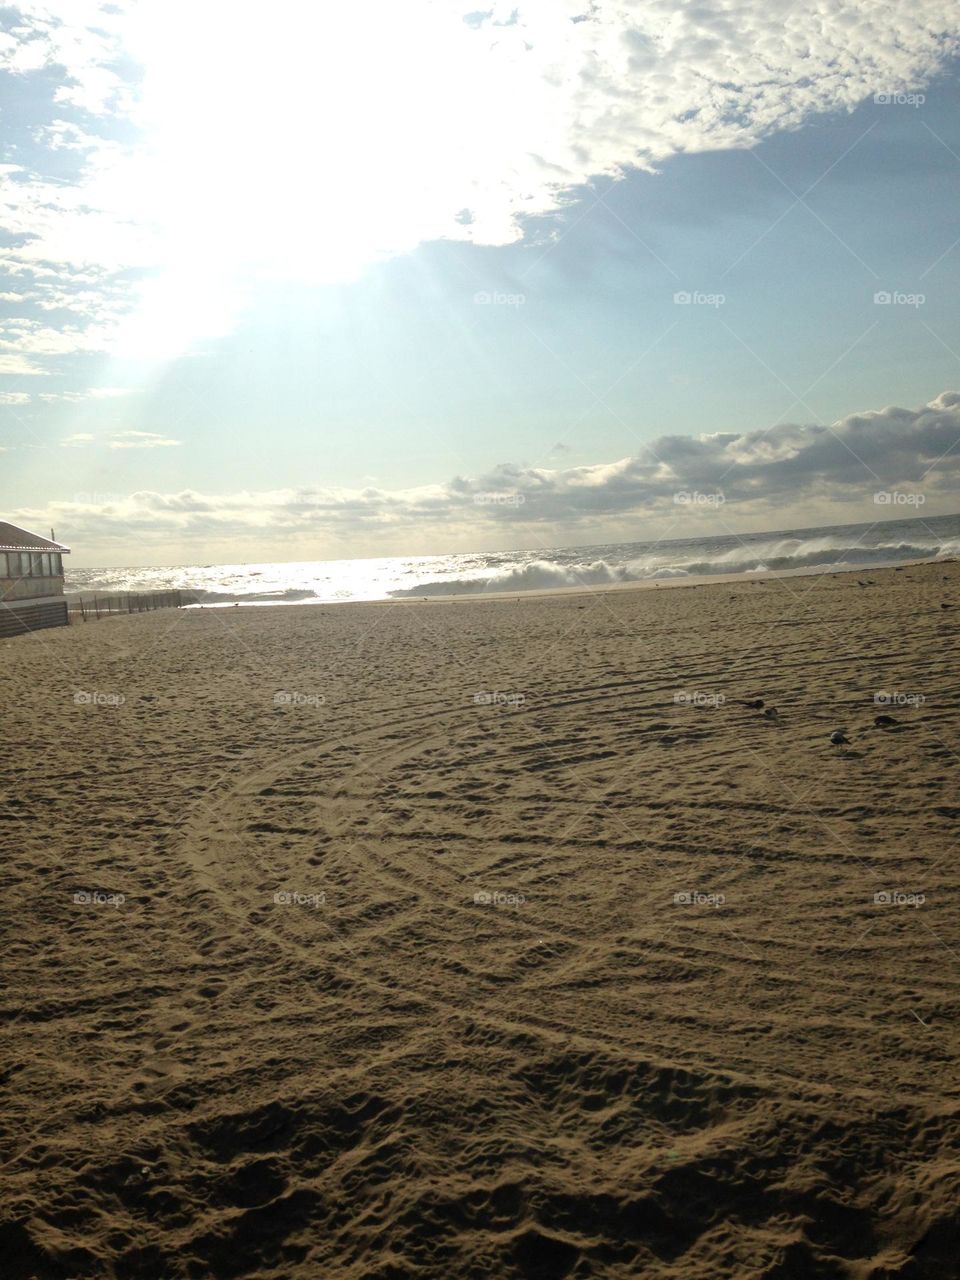 Tracks form a circular pattern in the sand in this photo of the beach taken from the boardwalk in Point Pleasant Beach, NJ. The wide stretch of sand is the focus of the photo, highlighted by ocean waves, clouds, and a streak of sun. 